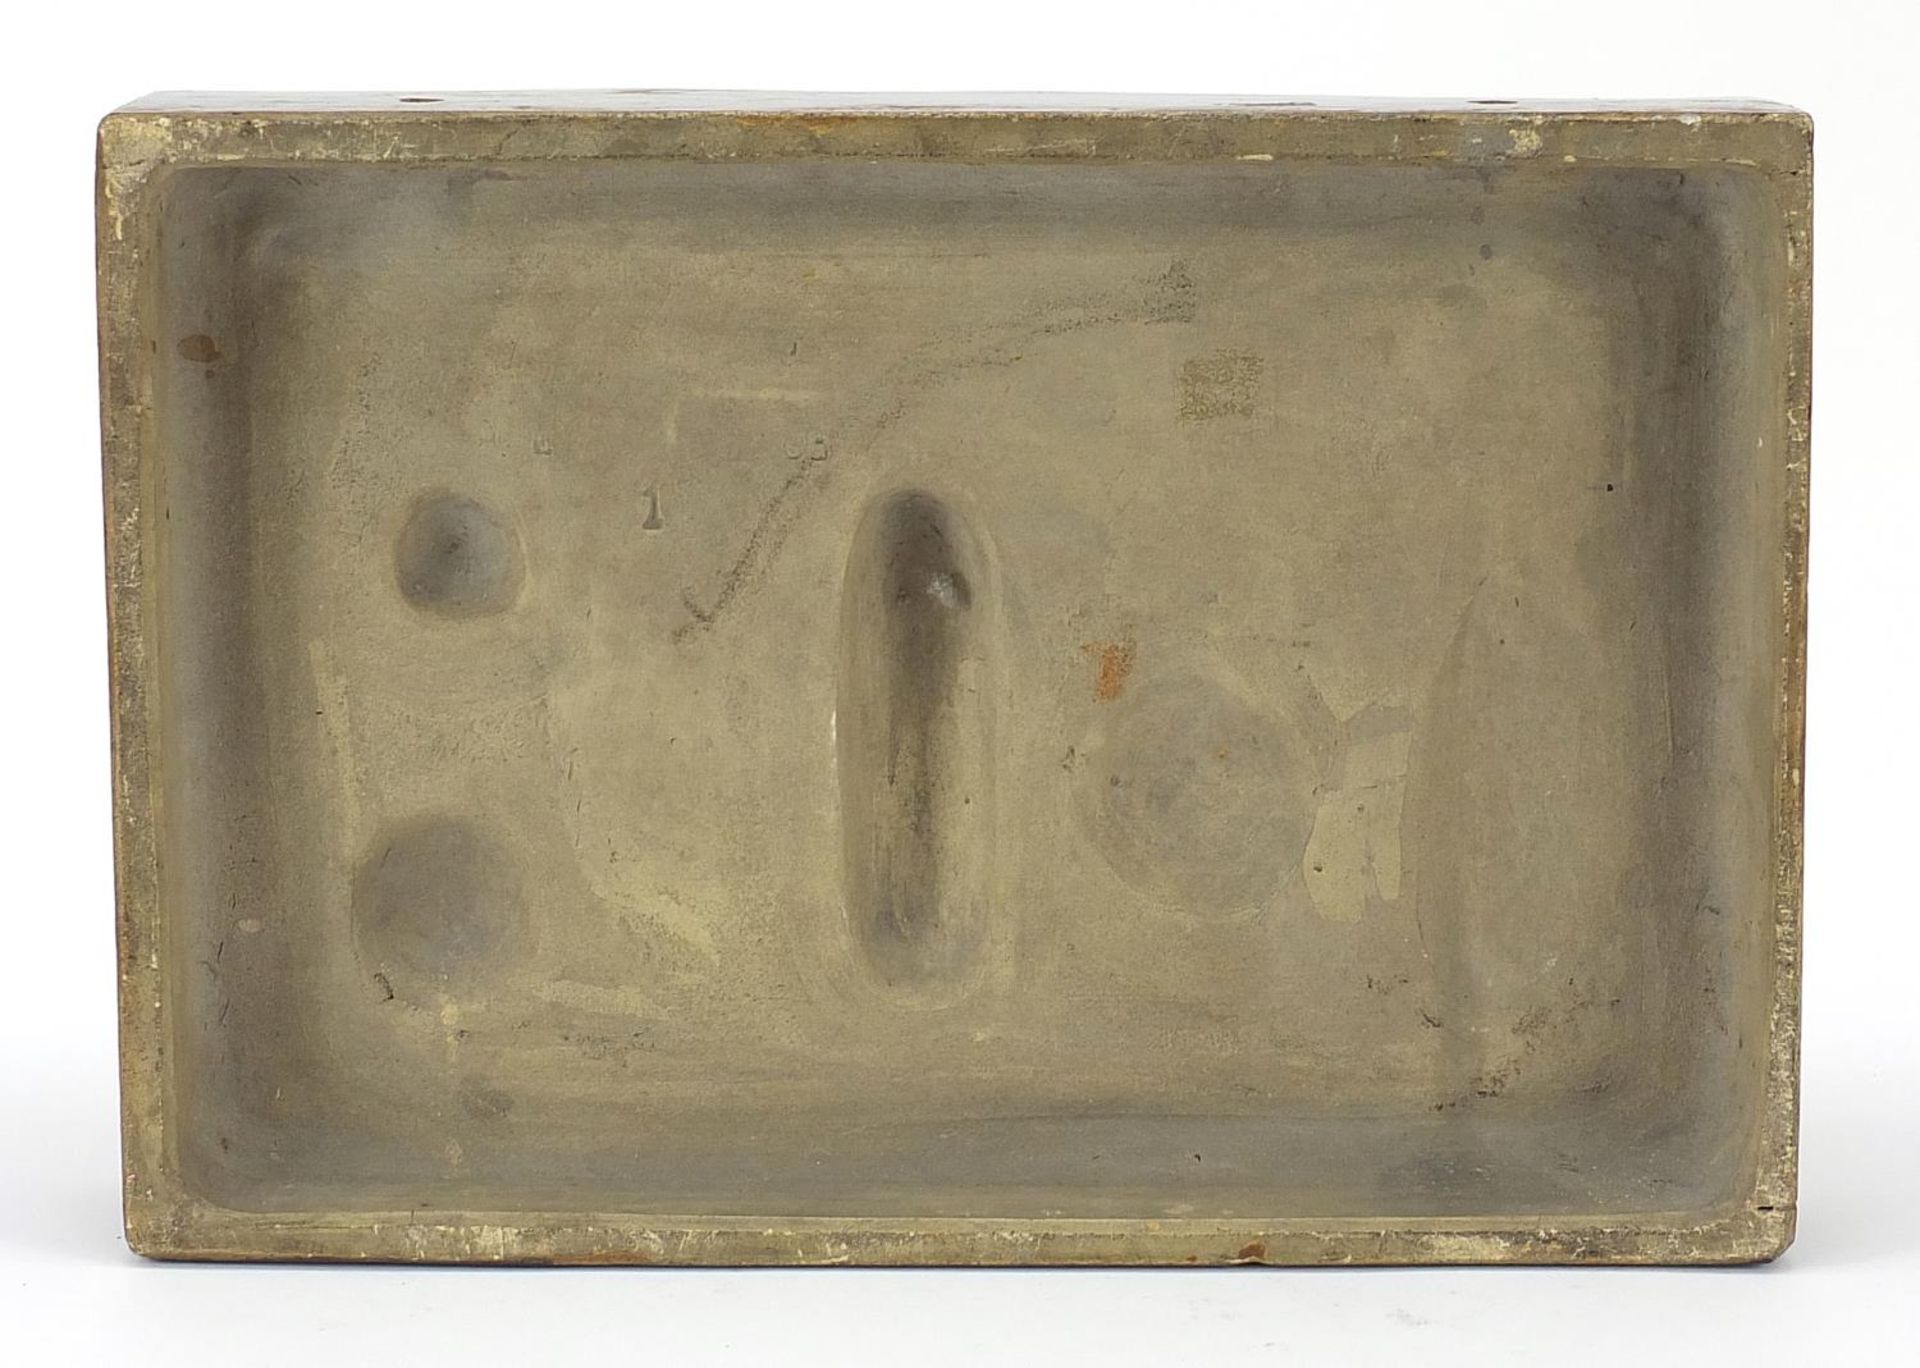 19th century Continental stoneware plaque decorated in relief with religious zealots burning - Image 6 of 8